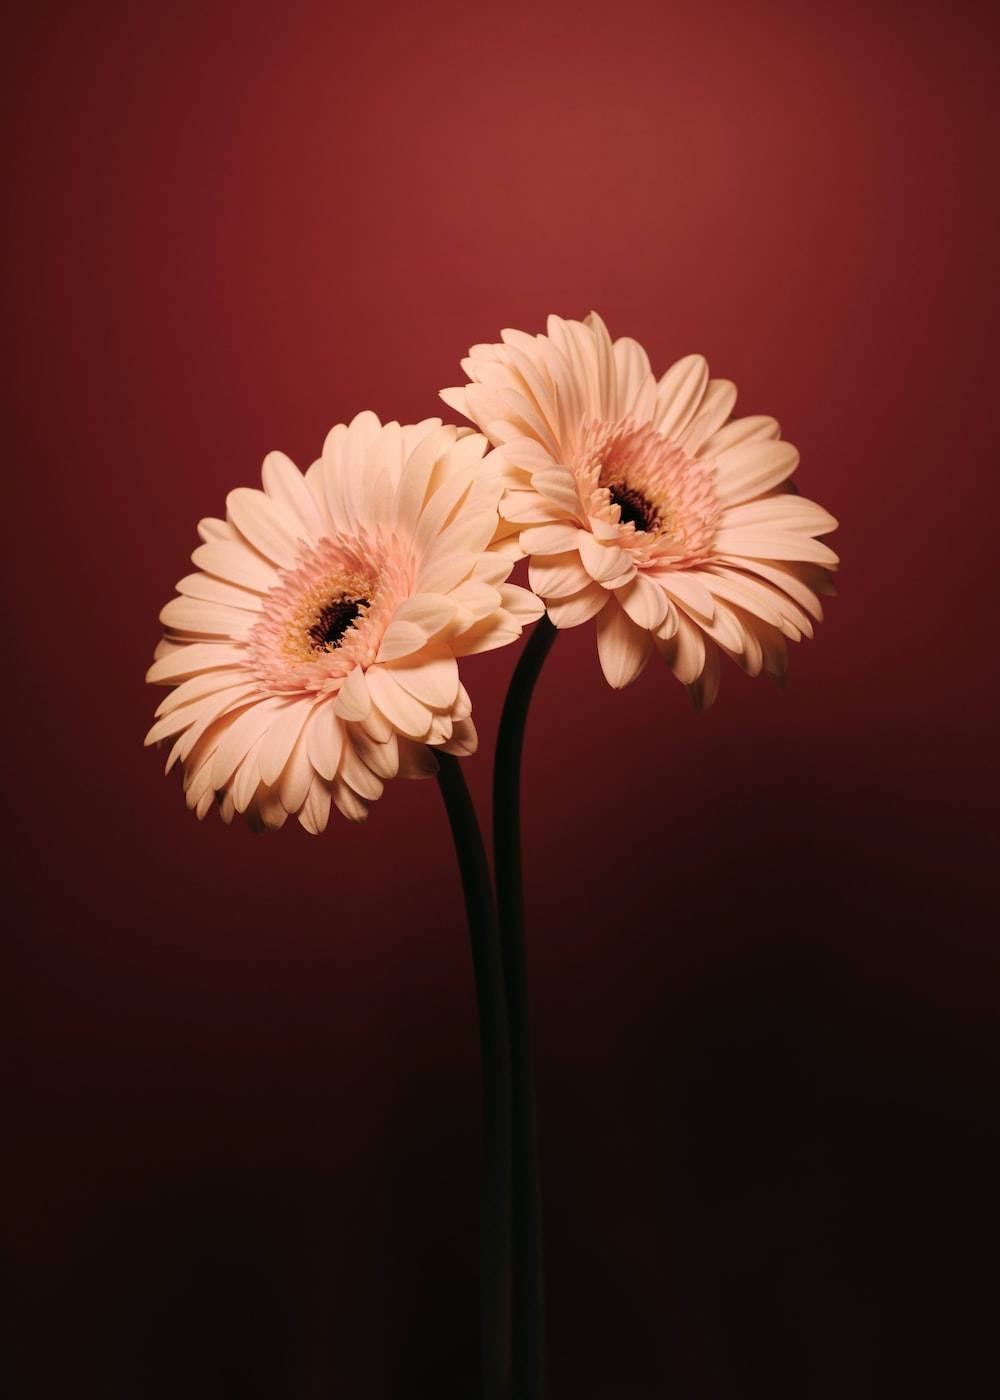 Caption: The Best HD Phone Showcasing a Brilliant Daisies Display Wallpaper